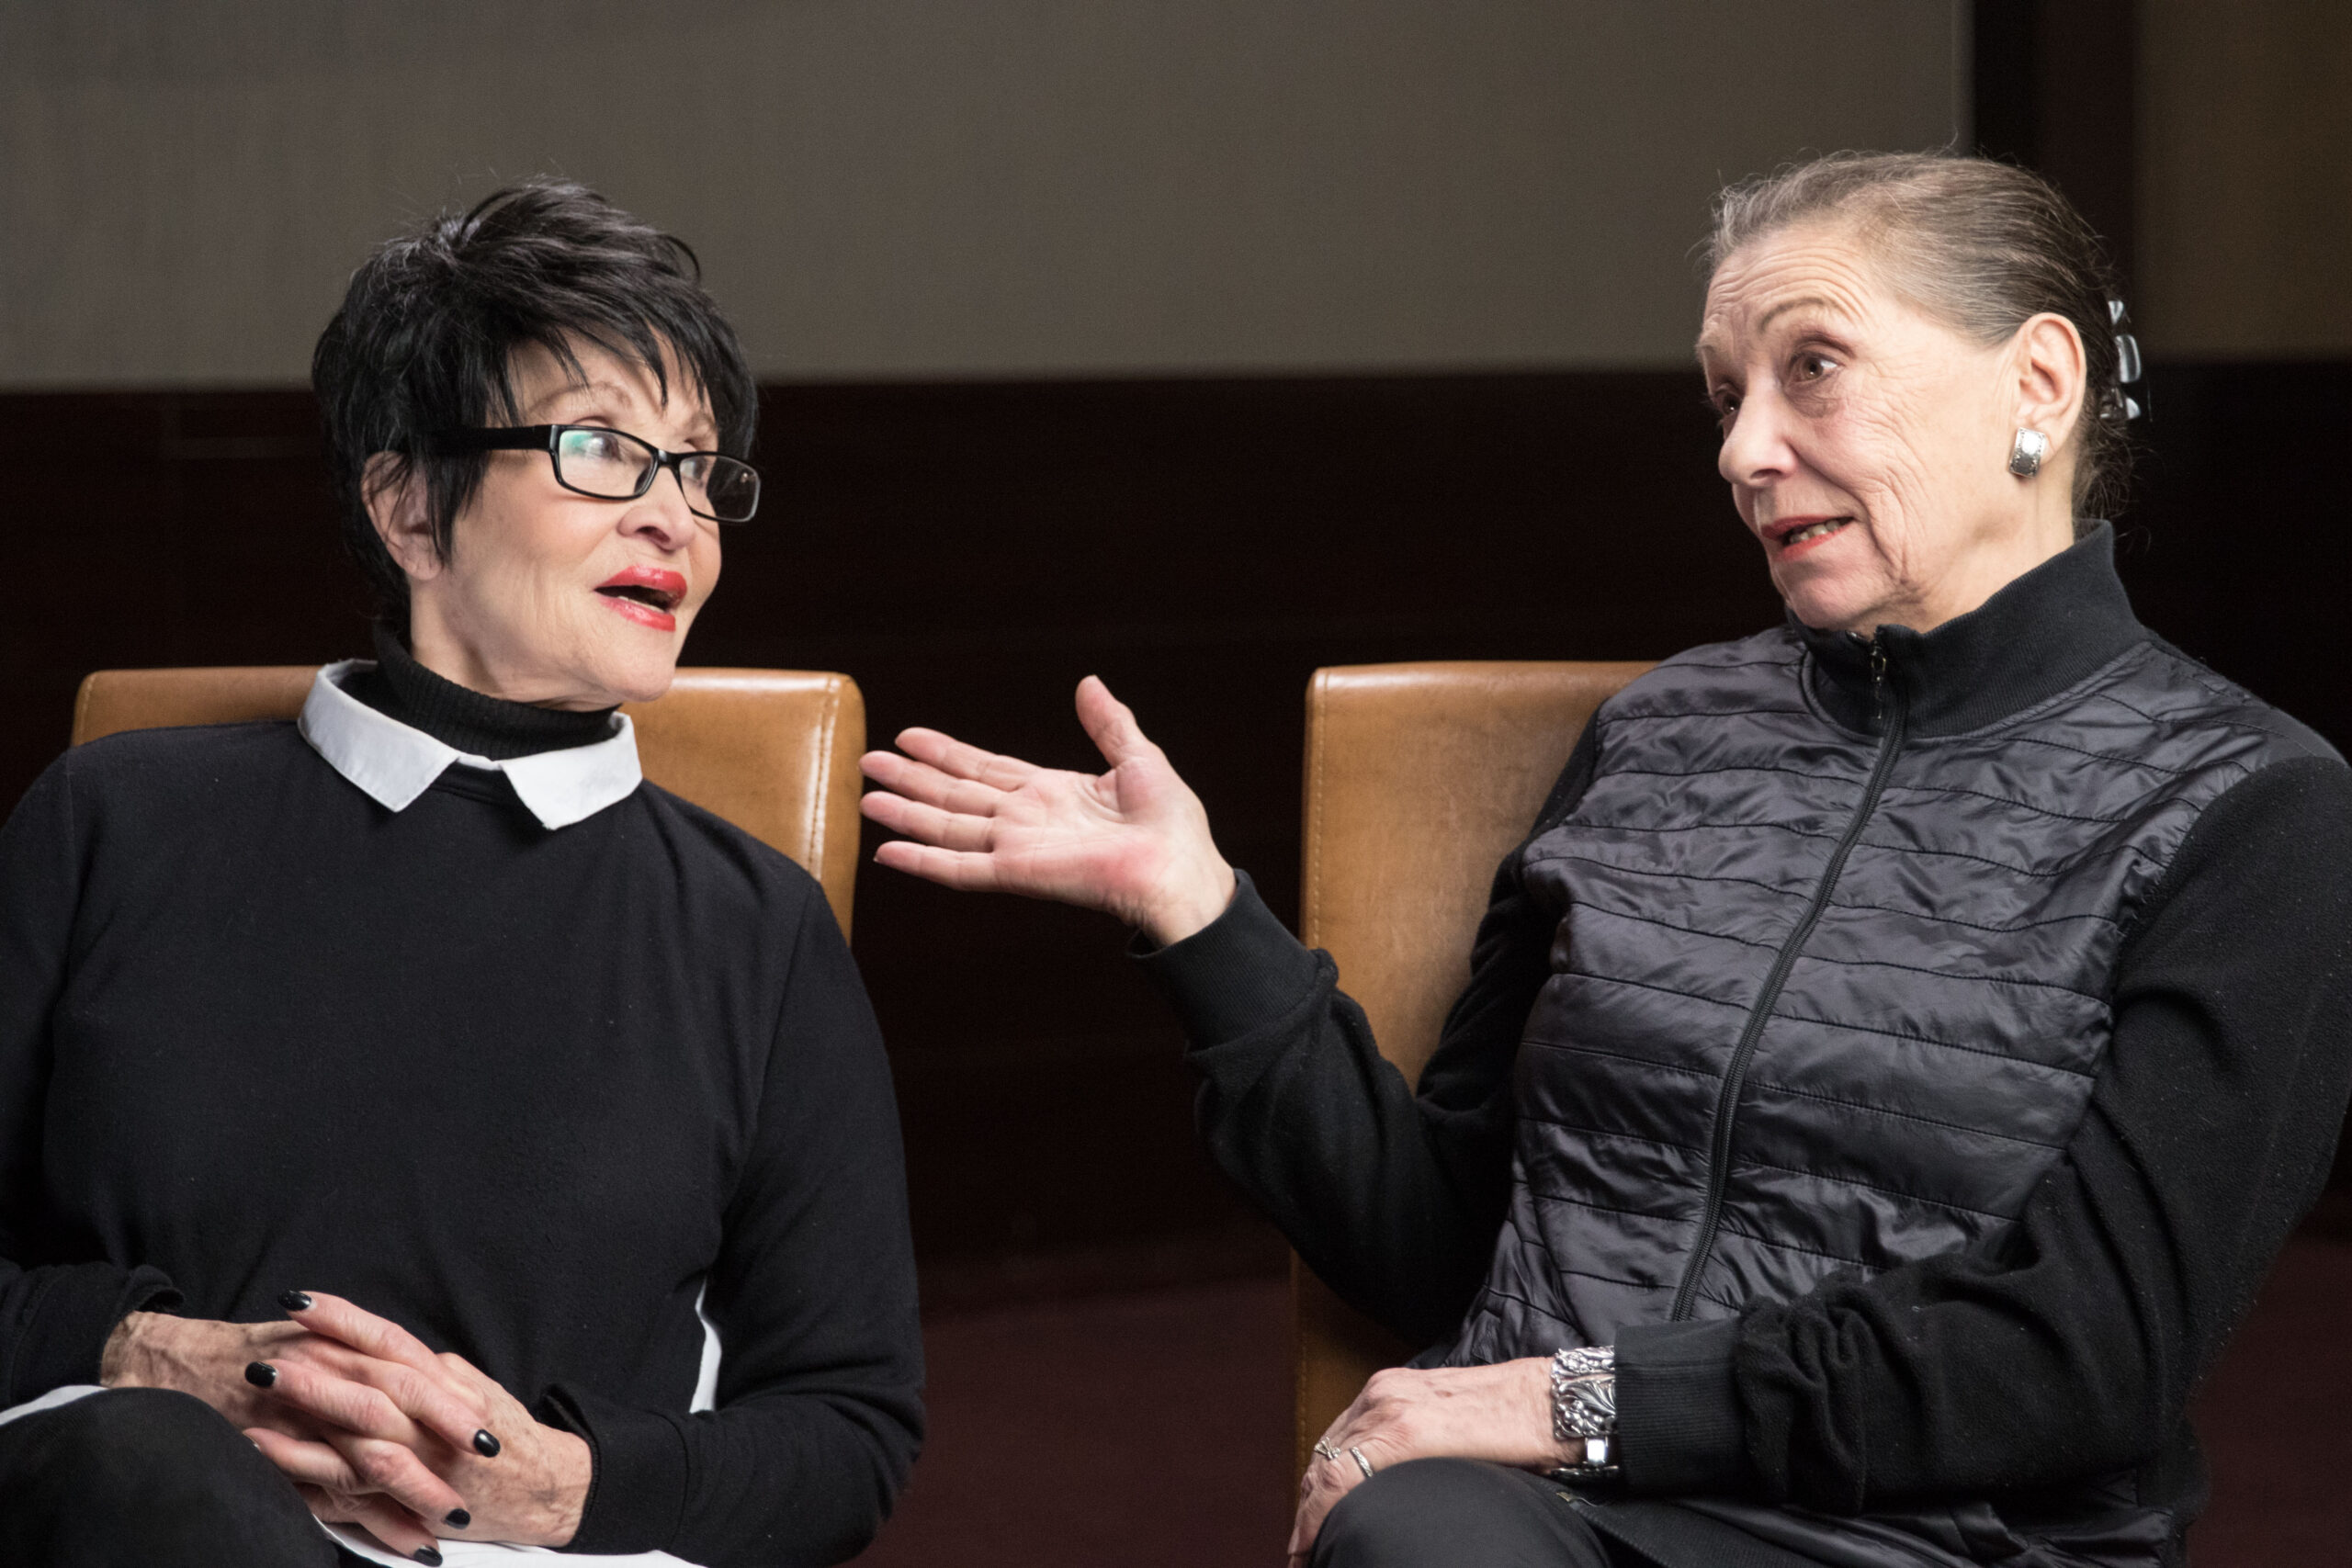 Chita Rivera and Graciela Daniele sit in leather chairs side by side, deep in conversation.